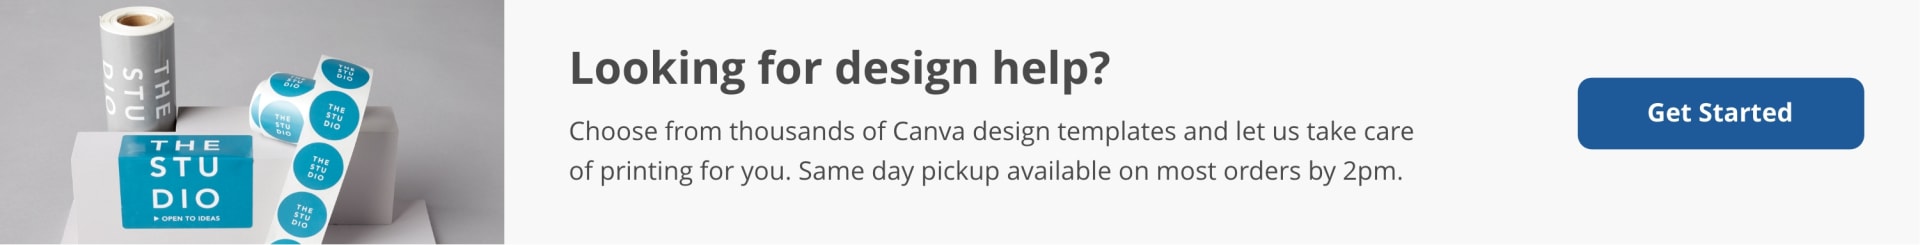 "Looking for design help?"